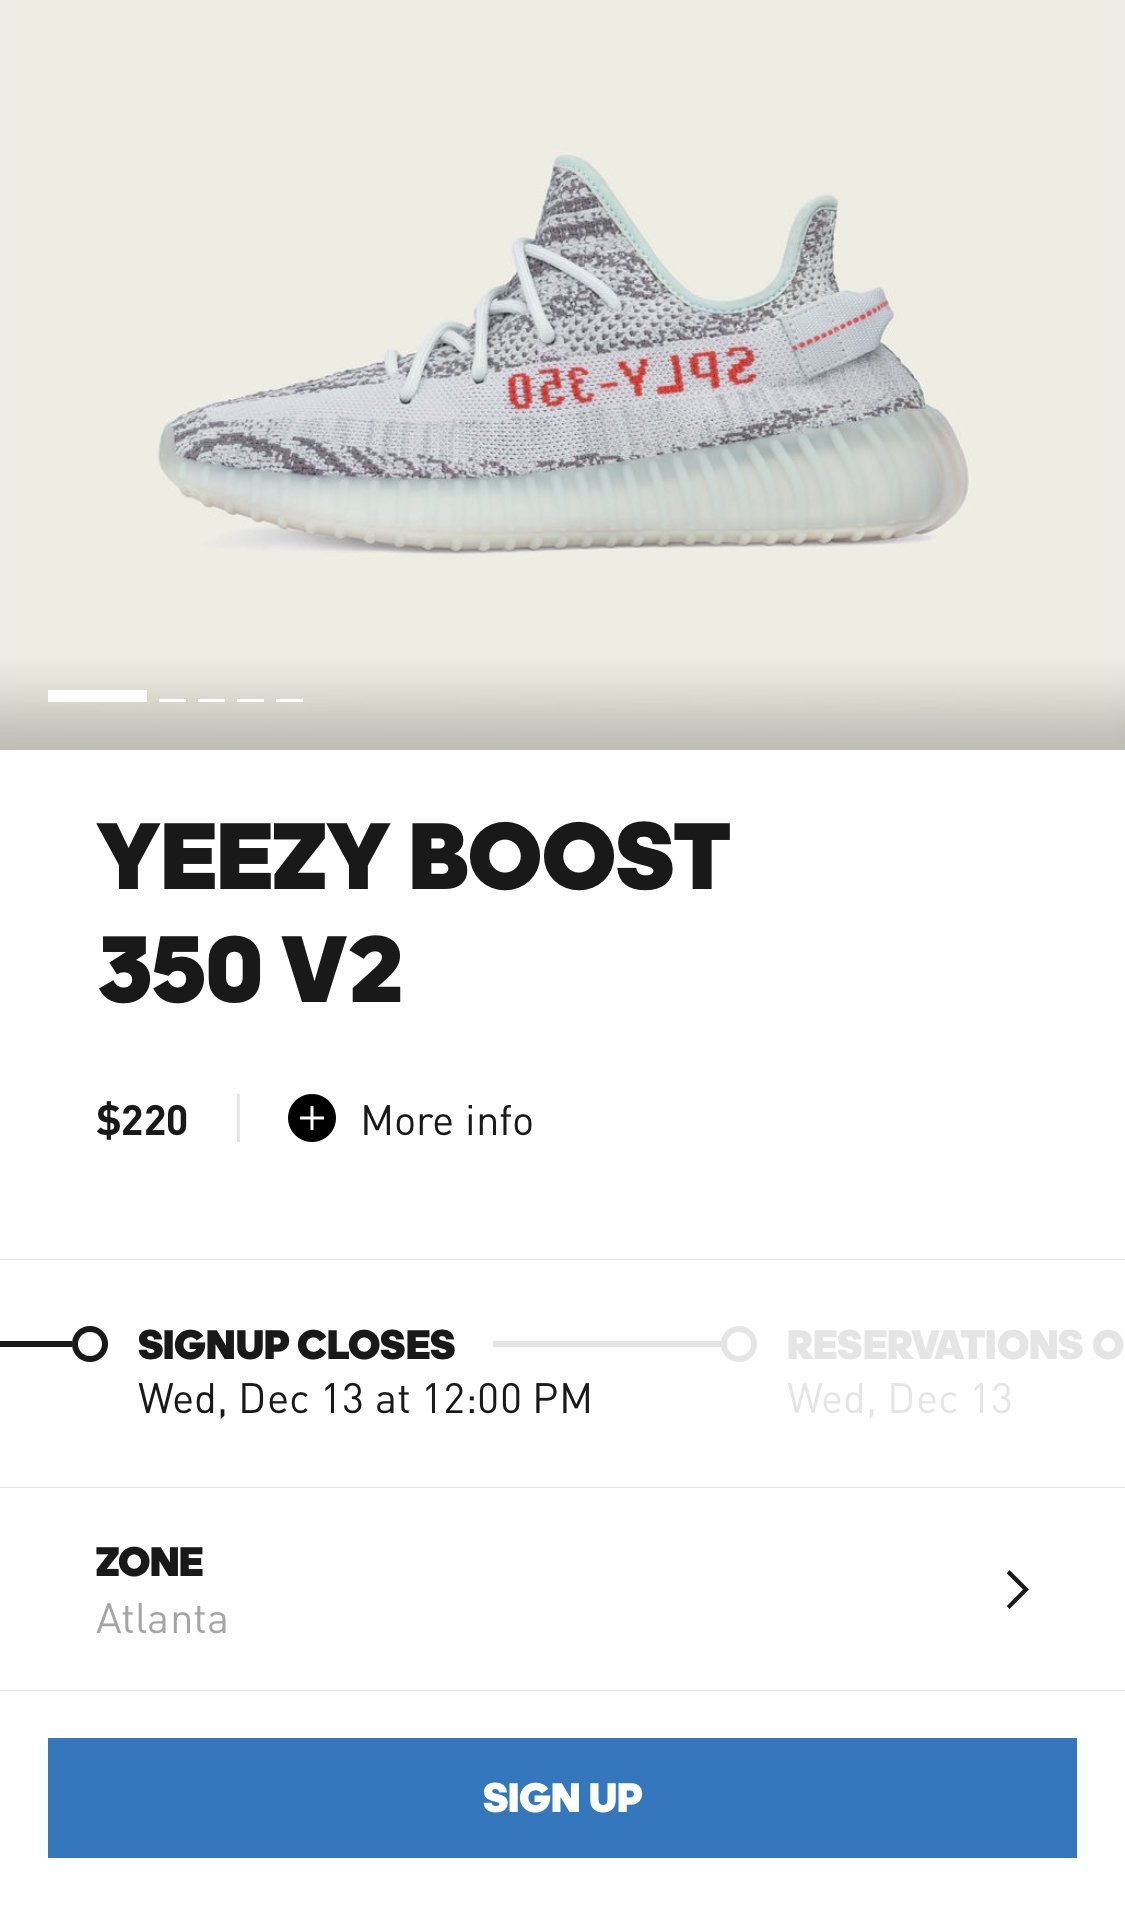 alerts on X: "Registration for the Blue Tint Yeezy Boost 350 V2 is now available on the adidas Confirmed app. Reservations go live Wednesday, 13. https://t.co/HzaMeKIcMc" / X